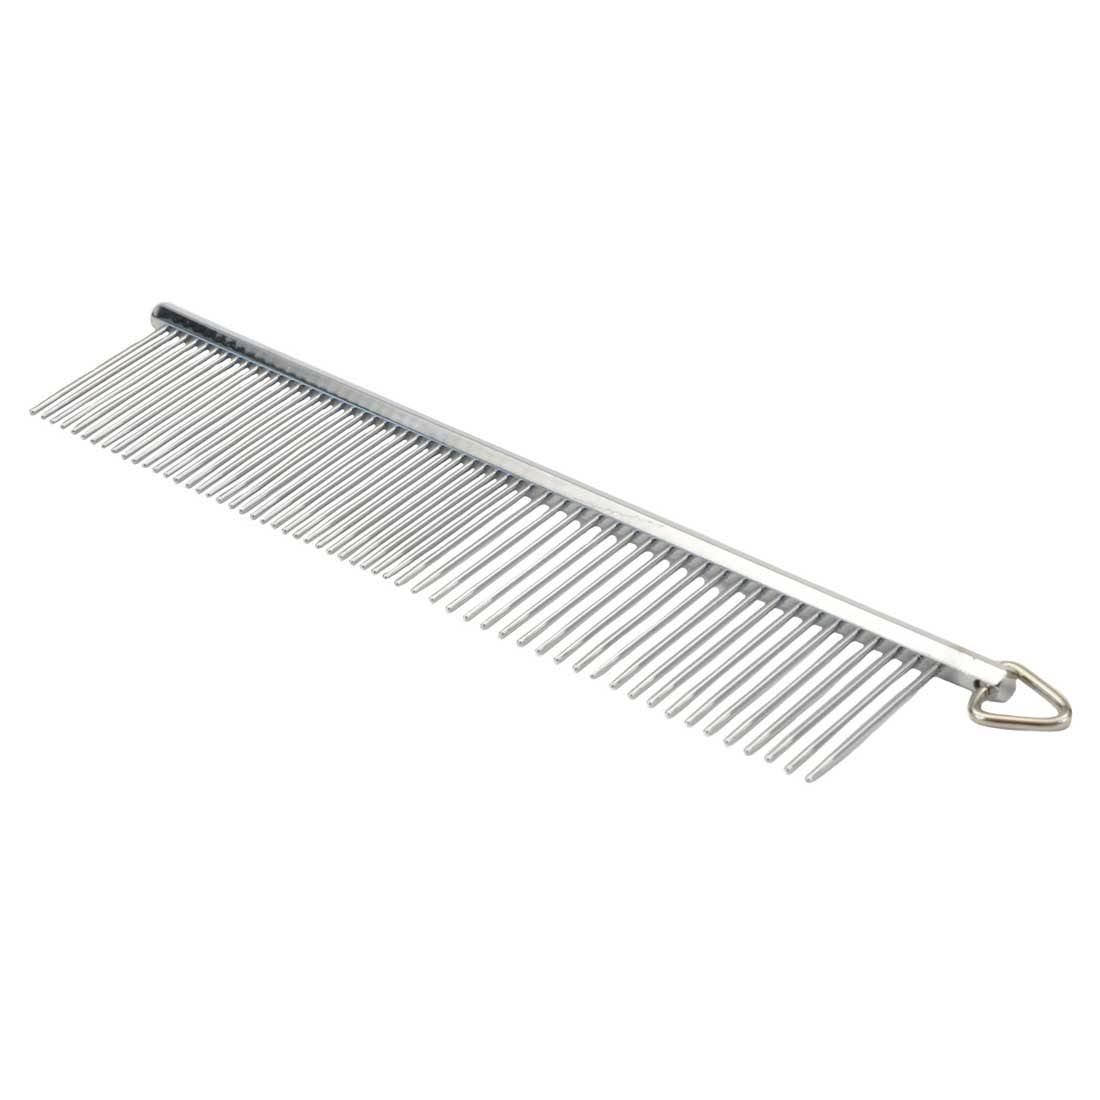 Safari Grooming Comb For Dogs - Stainless Steel, 7-1/4" Long